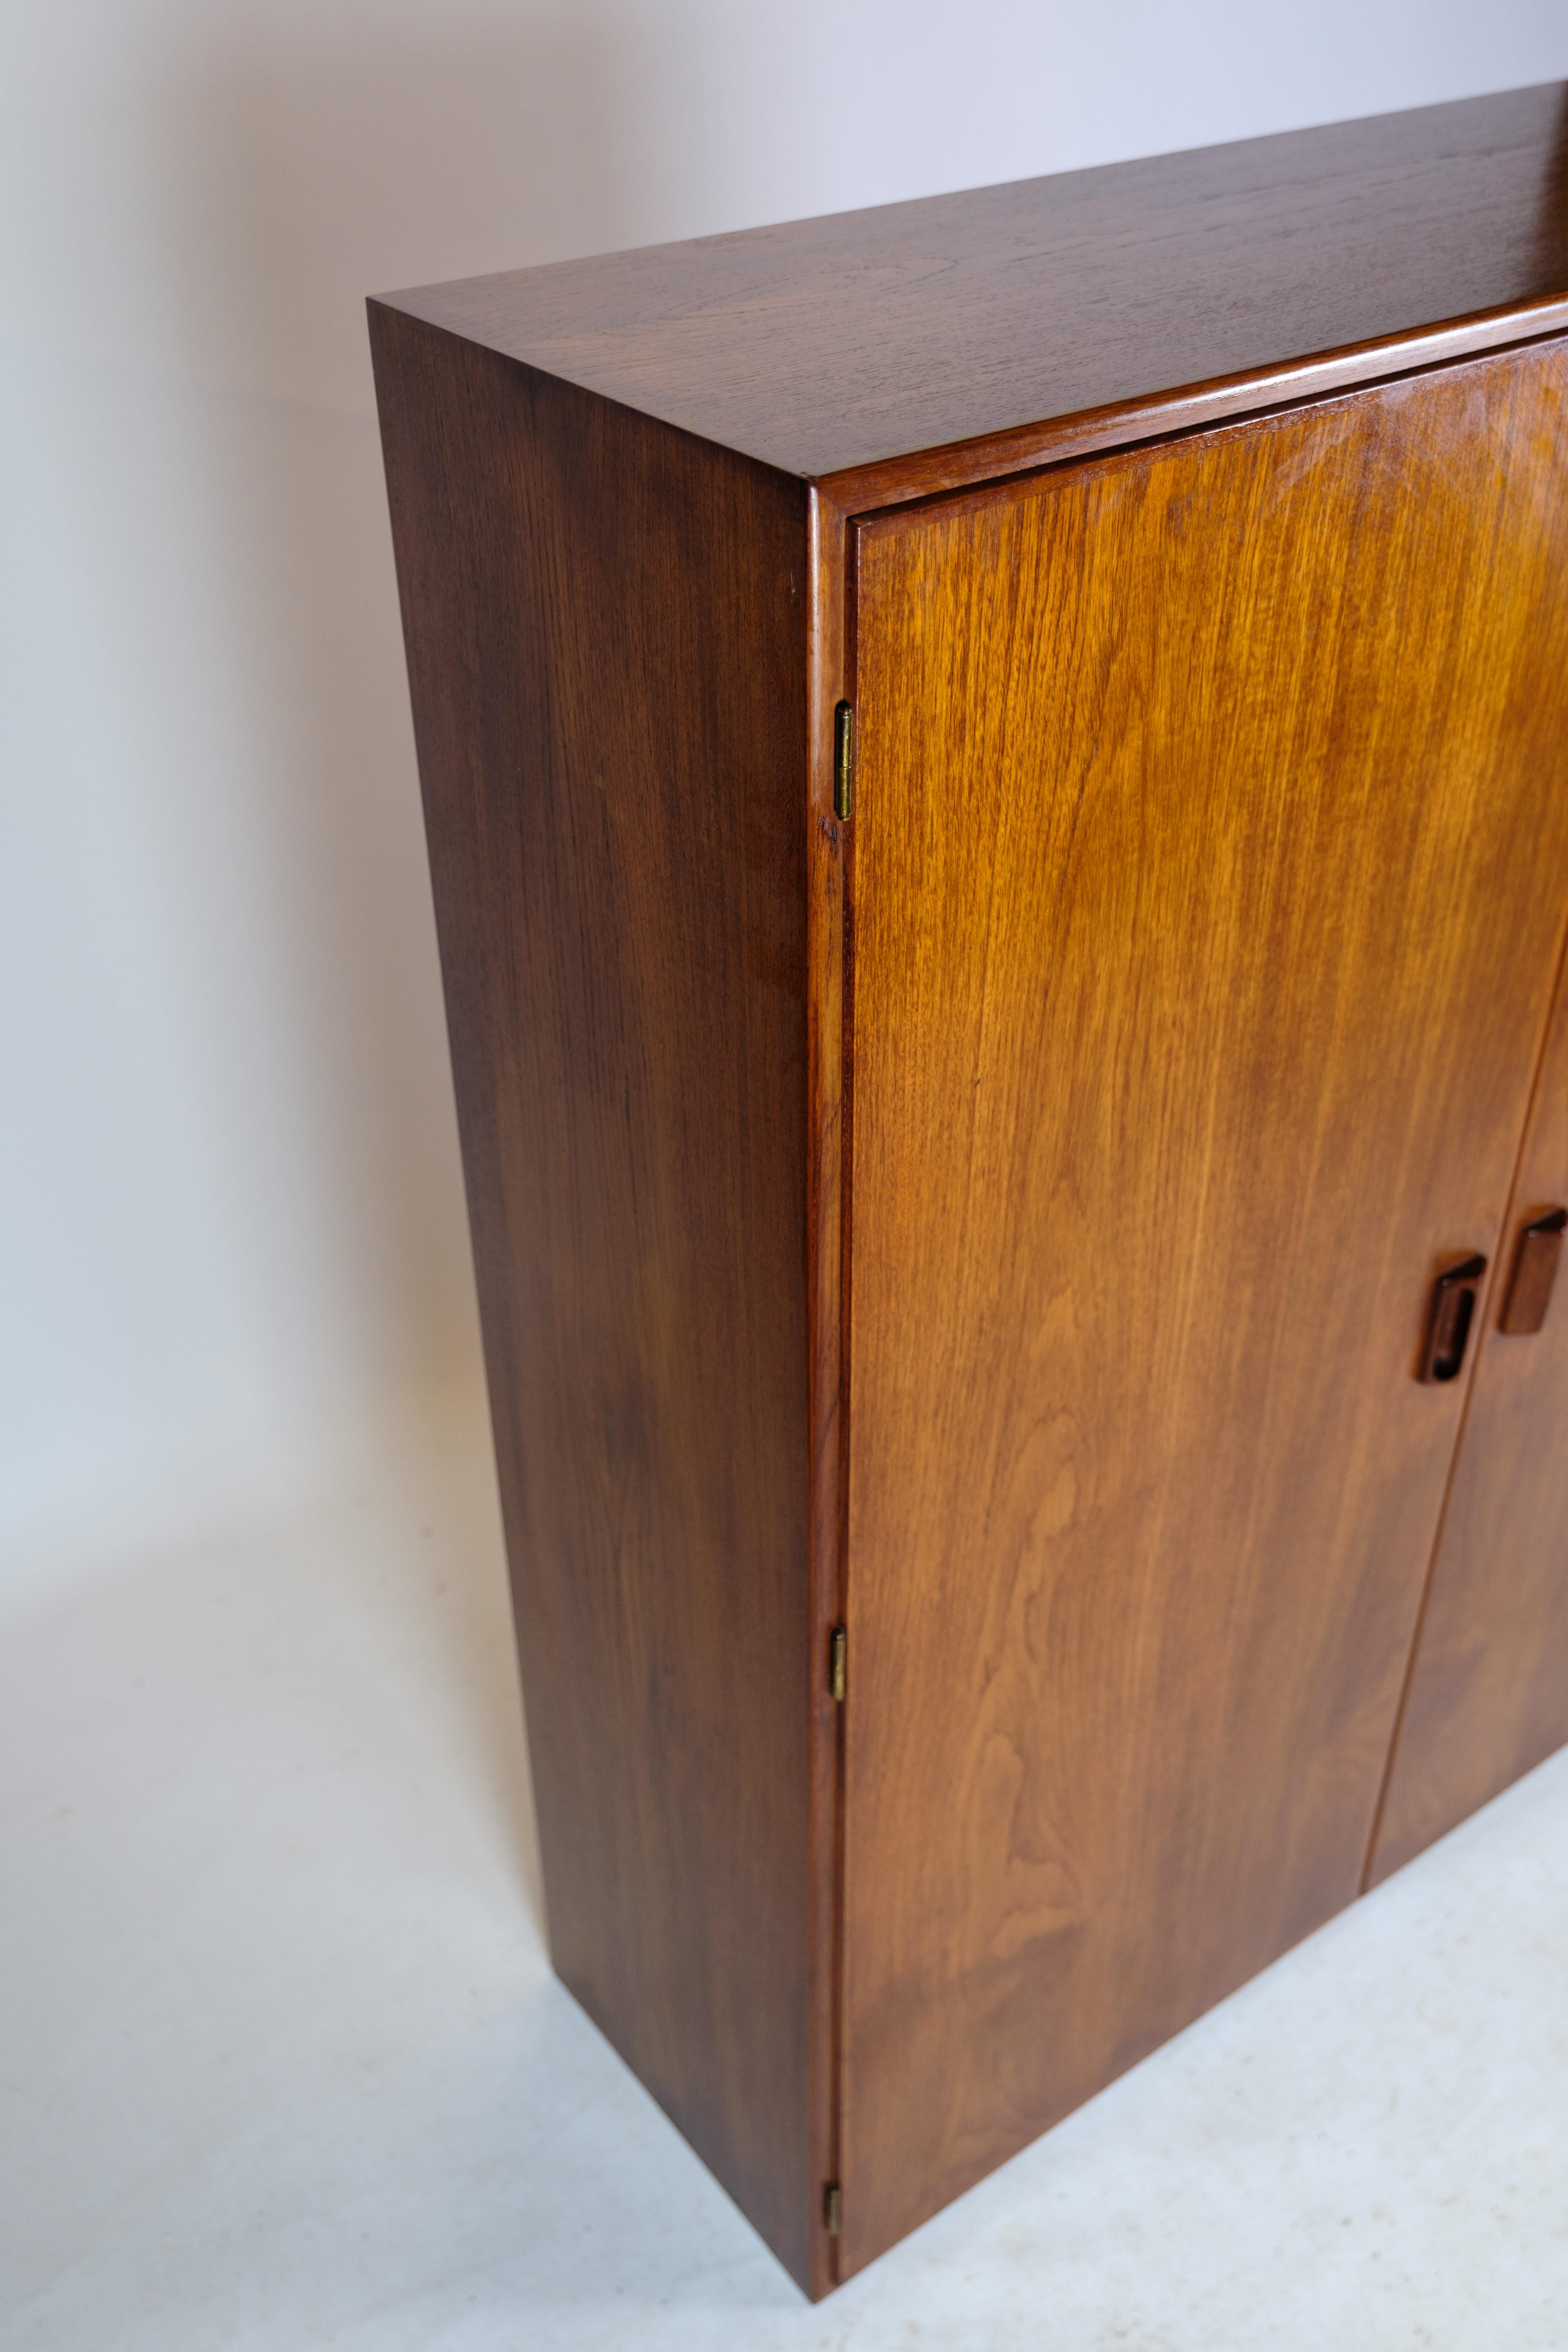 Børge Mogensen Hanging Cabinet In Teak Wood from the 1950s In Good Condition For Sale In Lejre, DK